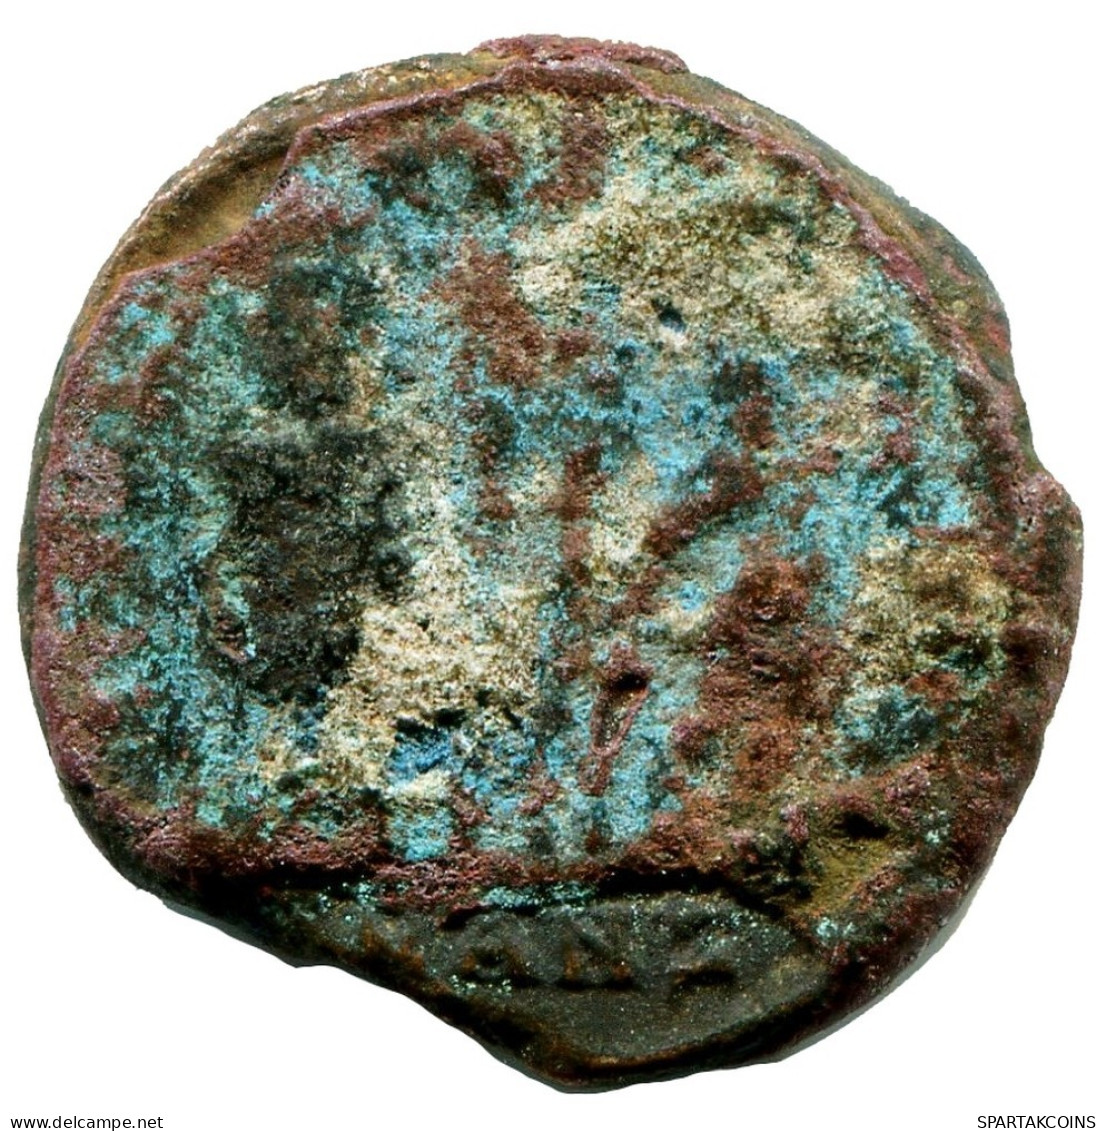 ROMAN Coin MINTED IN ANTIOCH FOUND IN IHNASYAH HOARD EGYPT #ANC11065.14.U.A - The Christian Empire (307 AD Tot 363 AD)